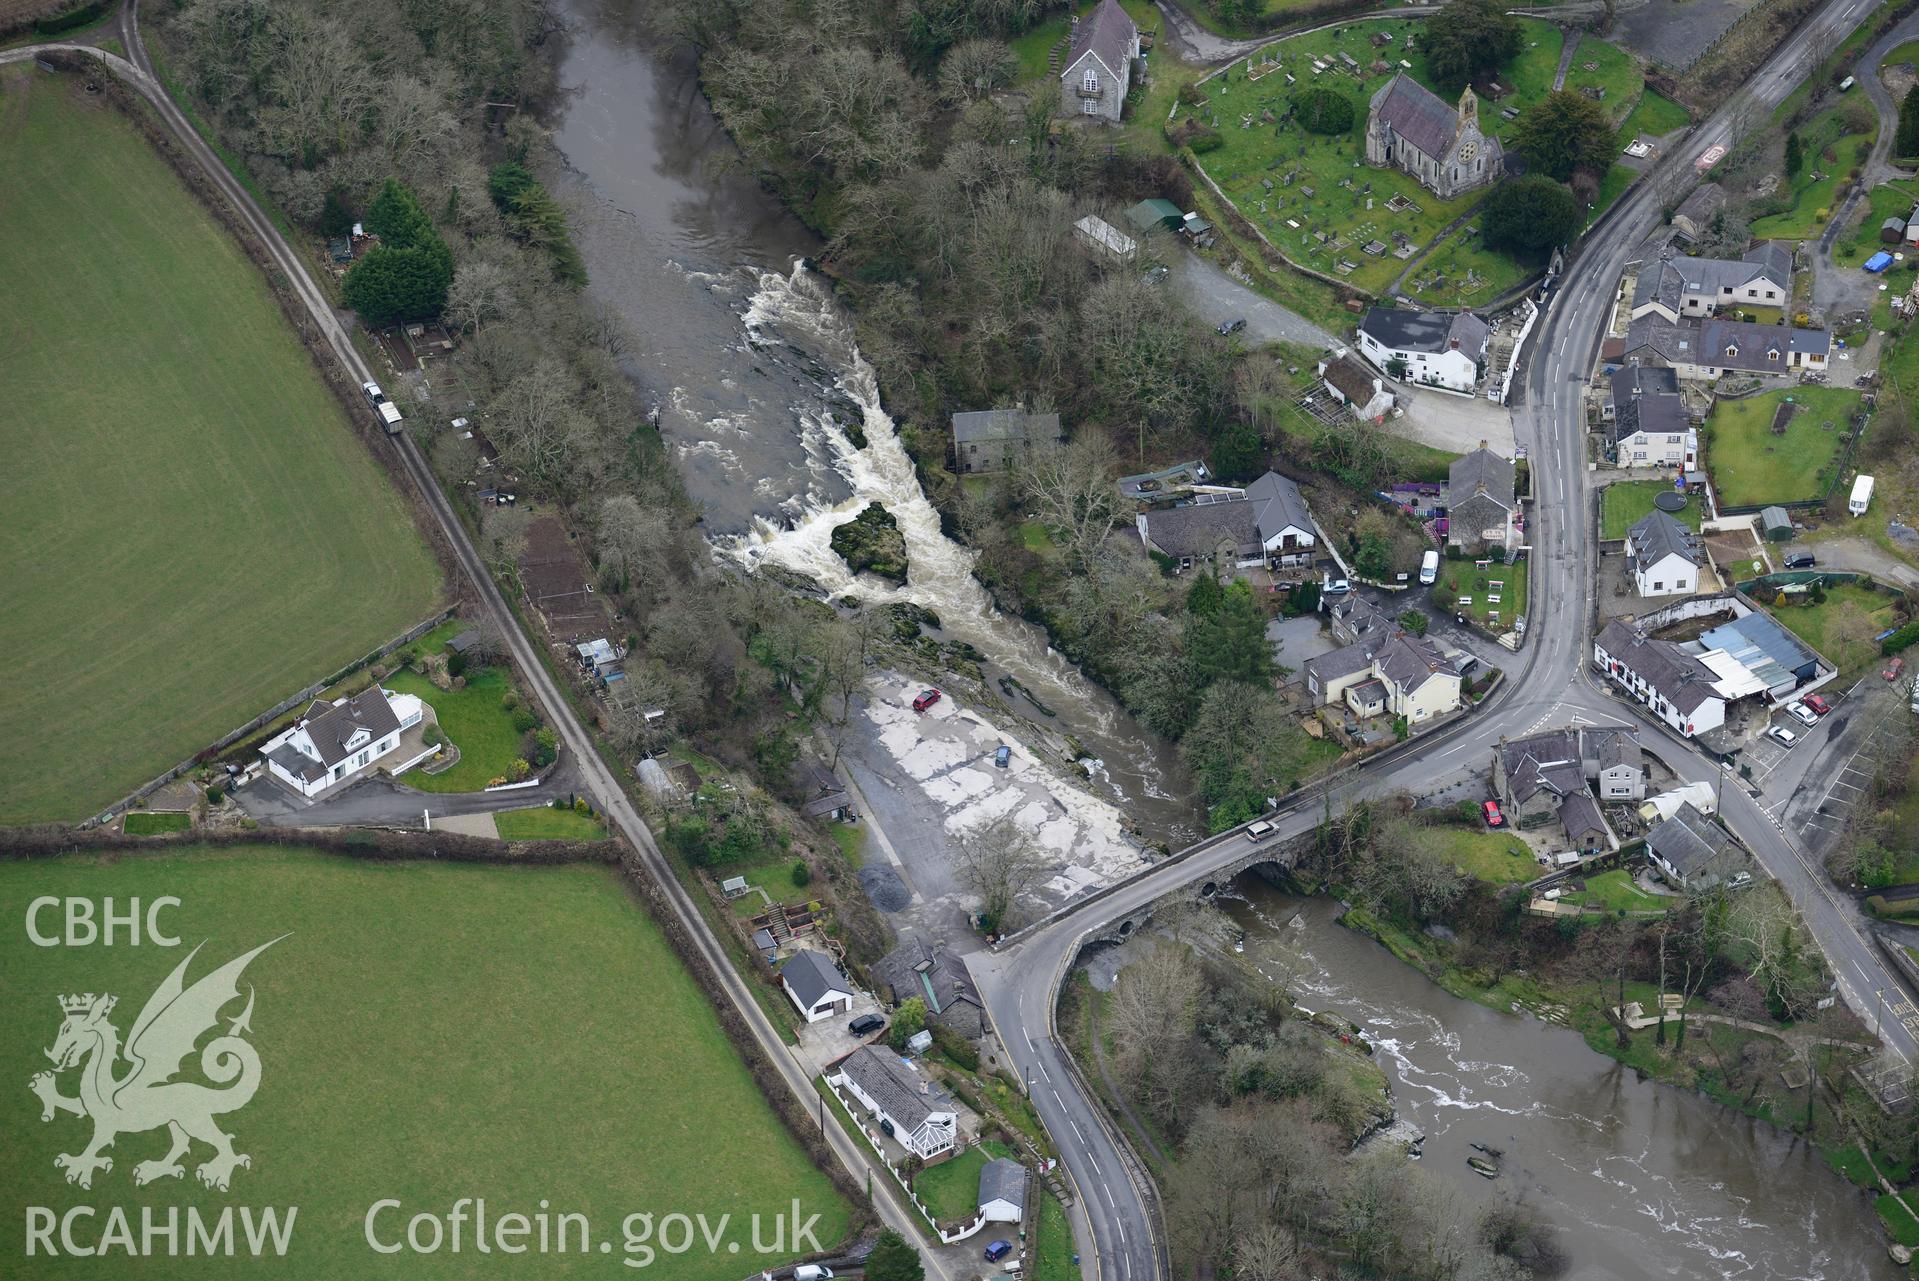 St. Llawddog's church and Cenarth bridge, Cenarth. Oblique aerial photograph taken during the Royal Commission's programme of archaeological aerial reconnaissance by Toby Driver on 13th March 2015.